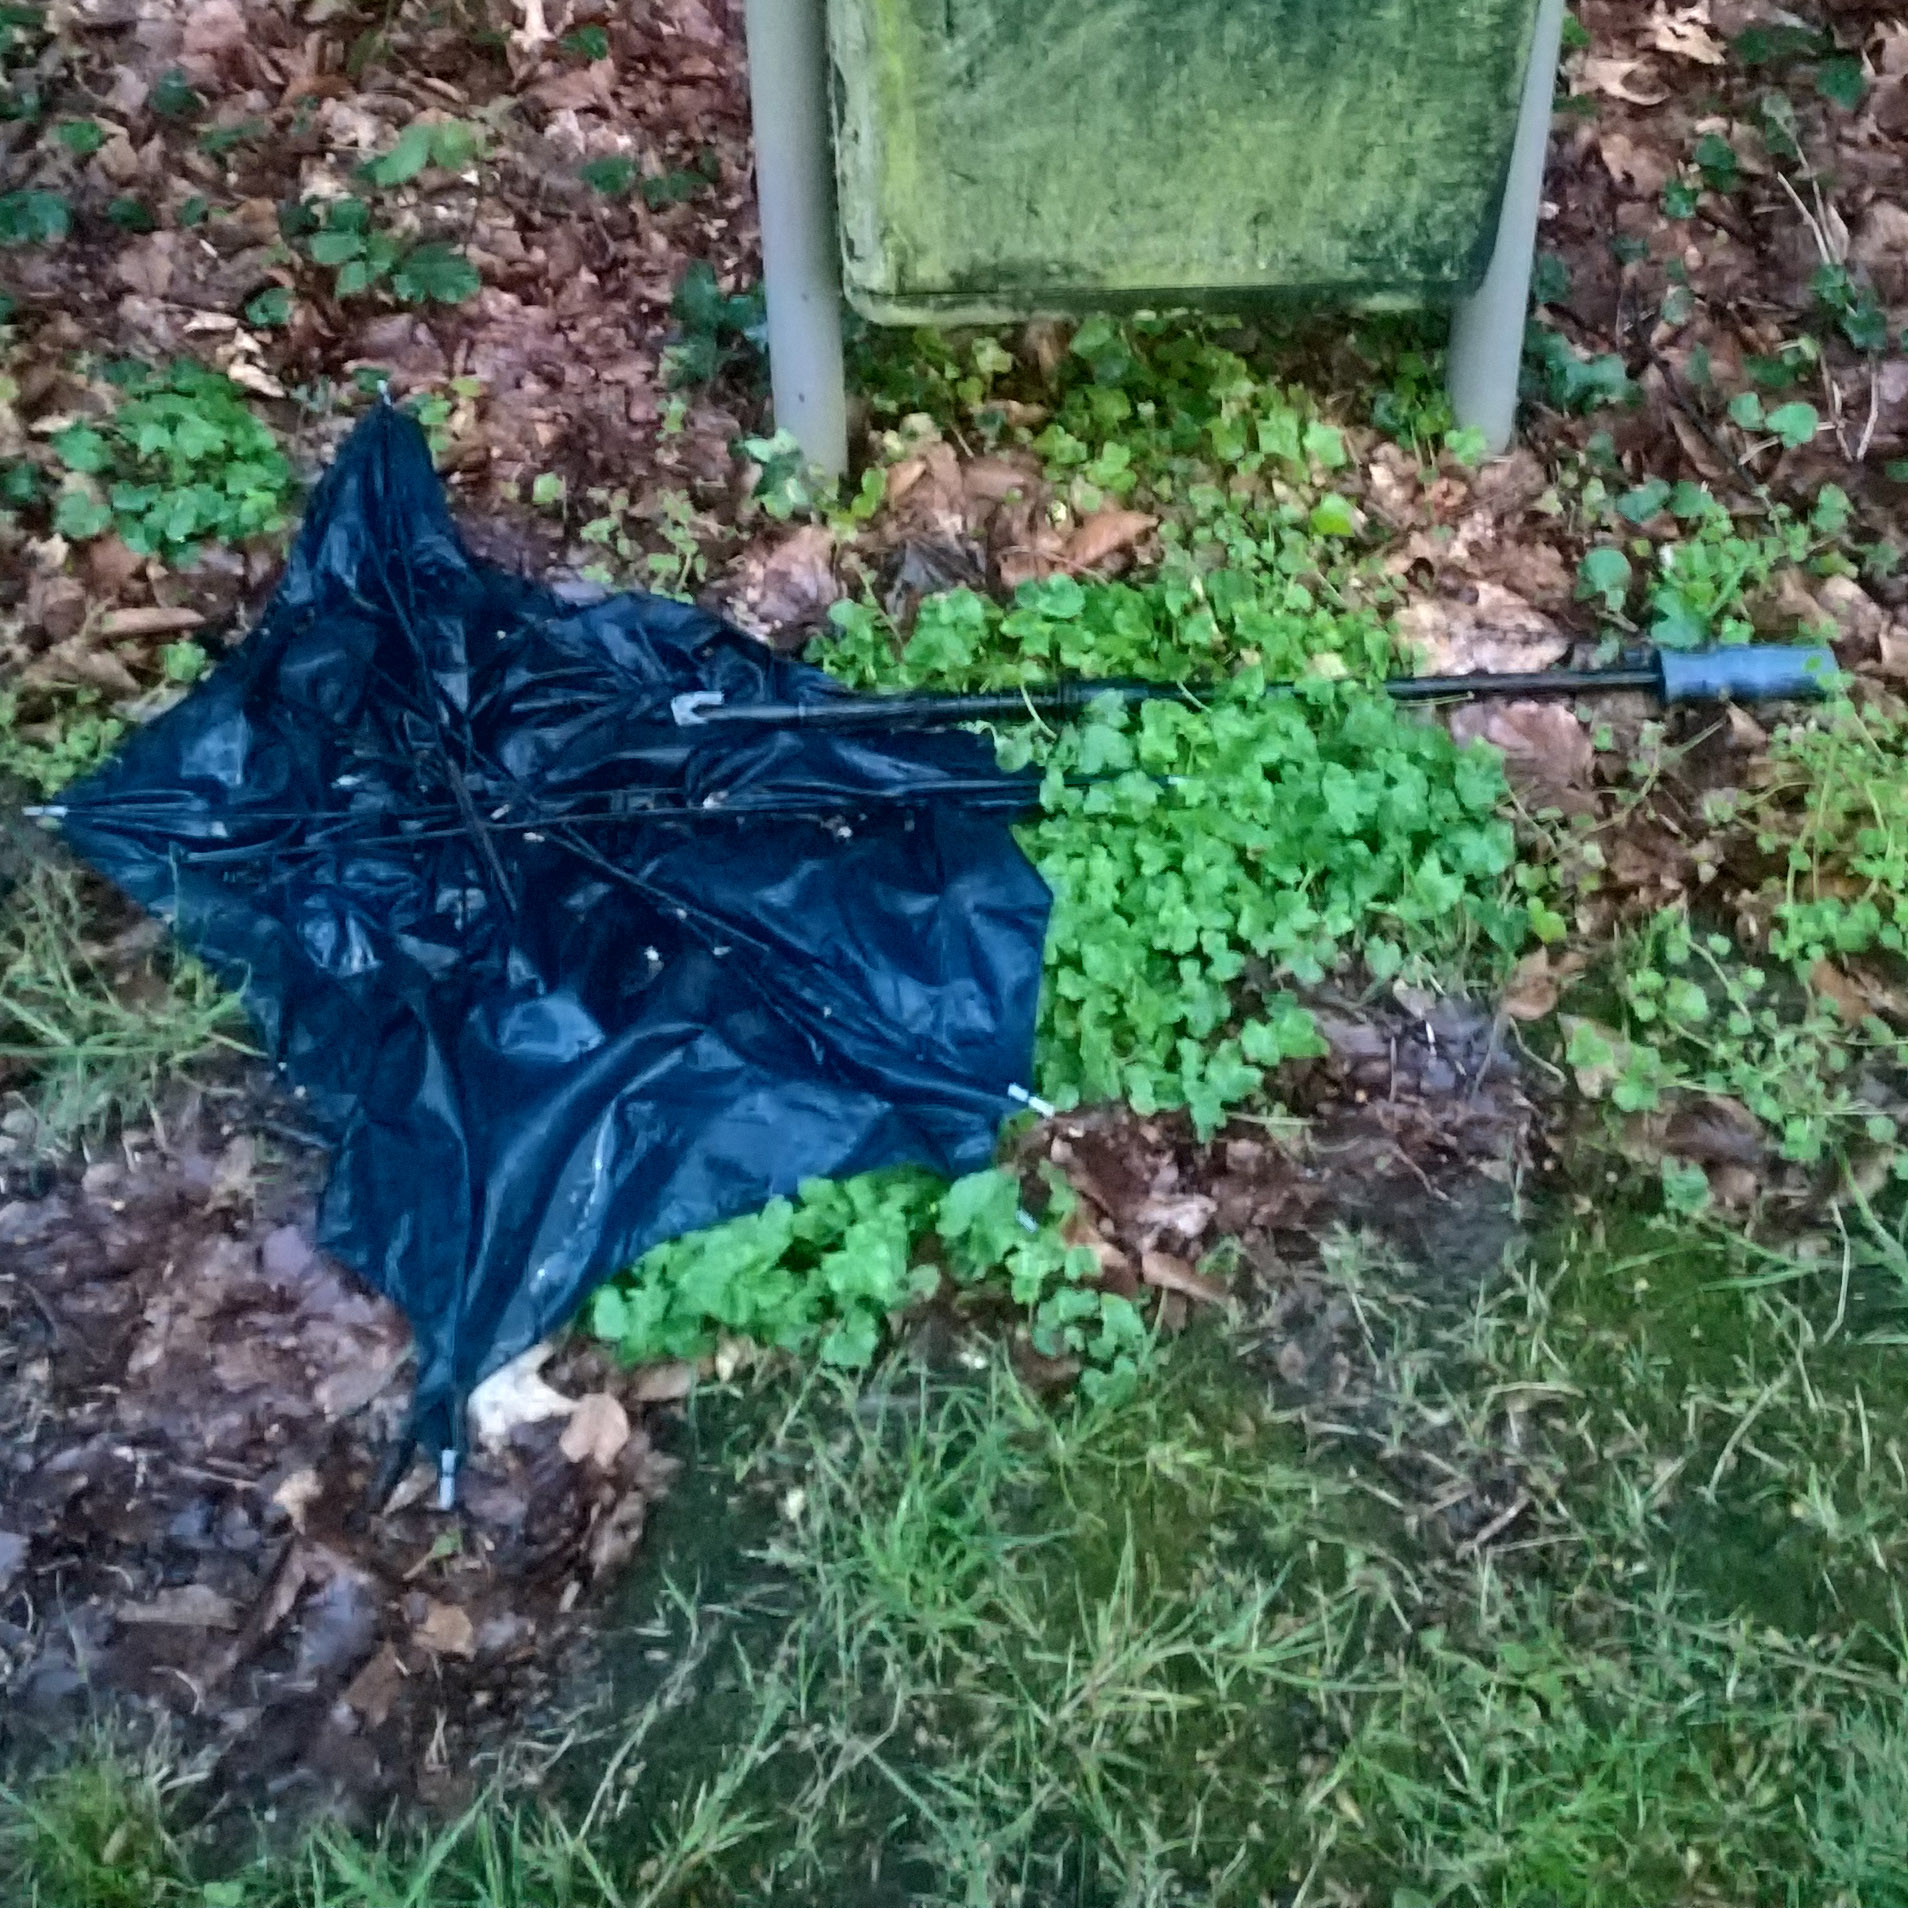 Nearly binned brolly, blue canopy and plastic handle. Foldable shaft.. Bin is a green plastic one on forrest like soil with a broad opening. Bin got quite some mould or alge on it. Bin looks empty but still the brolly lays next to it.